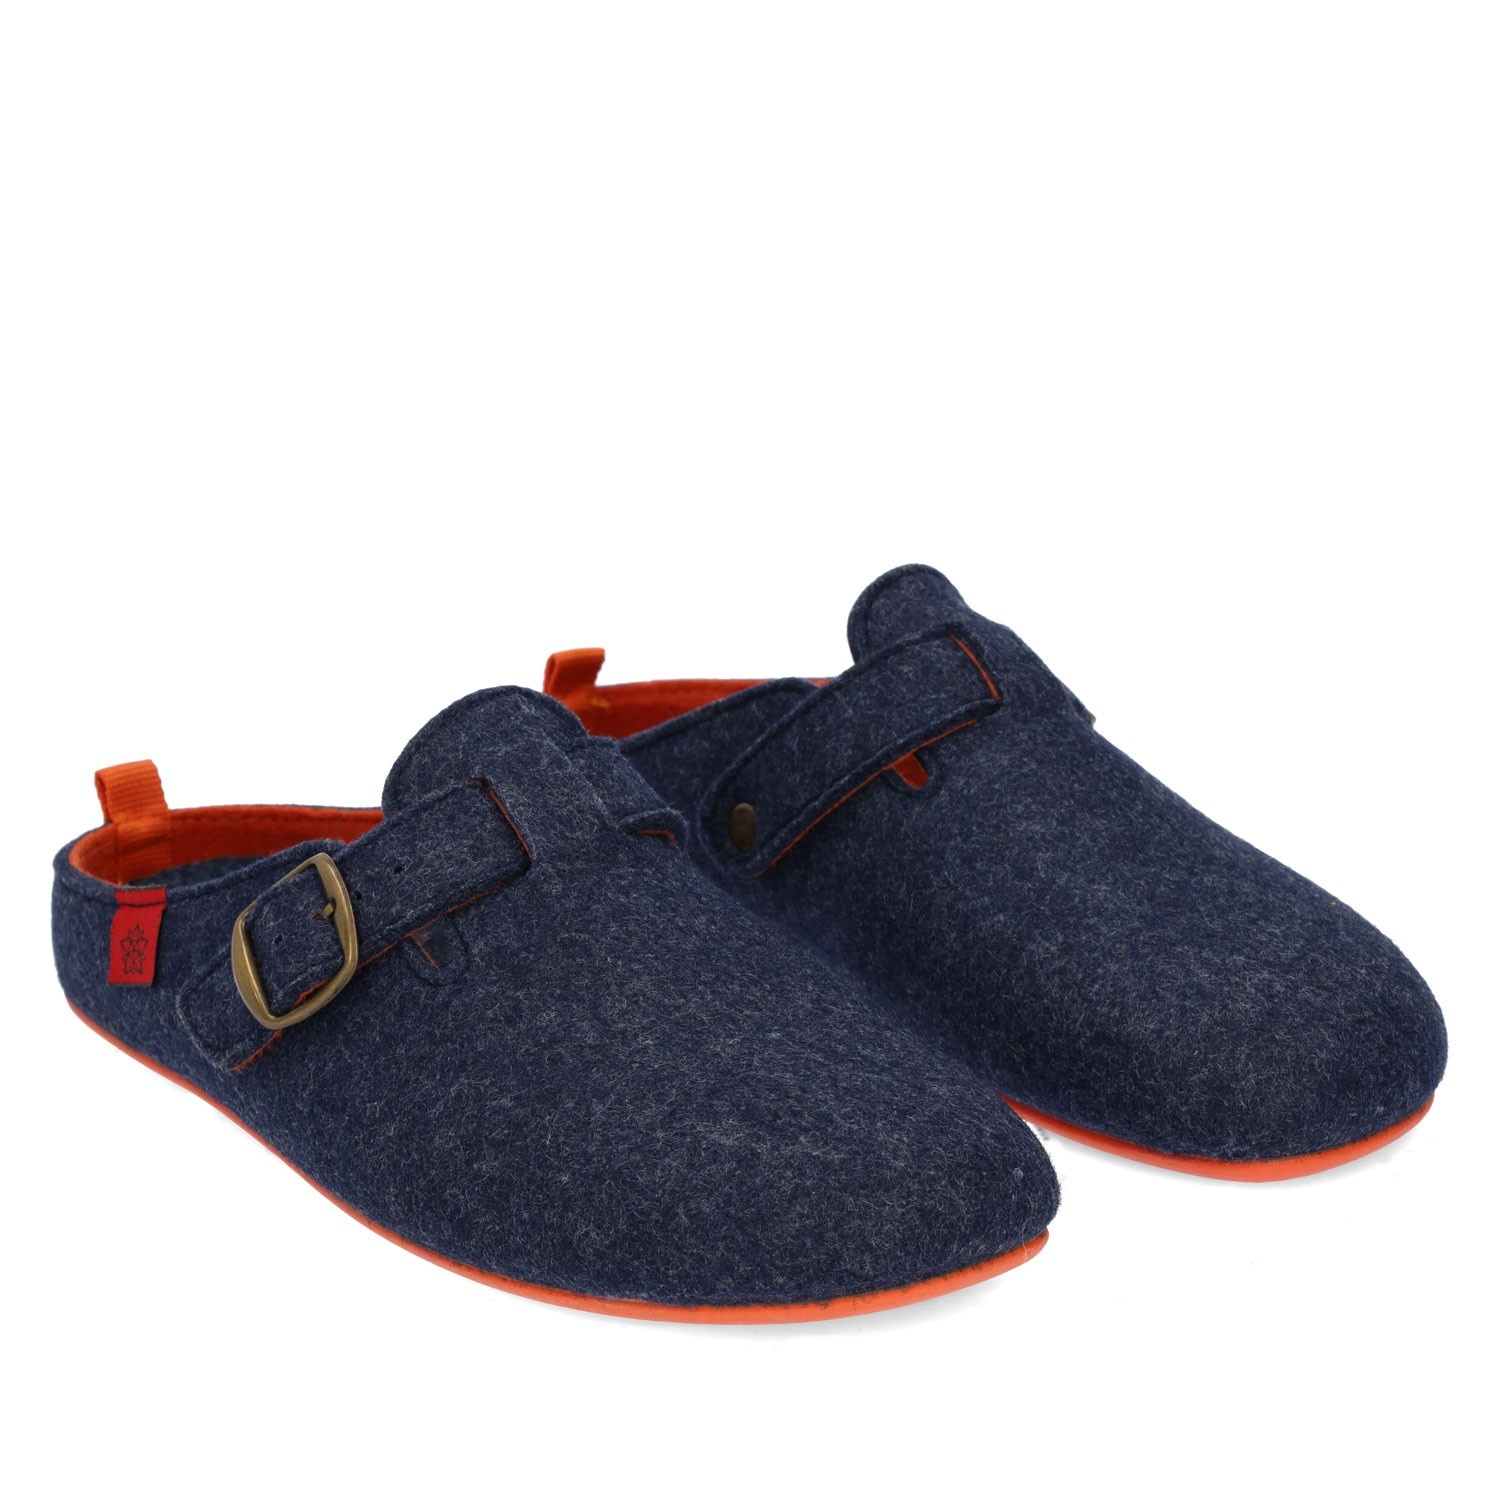 Buy Home Slippers - Andres Machado Official Store